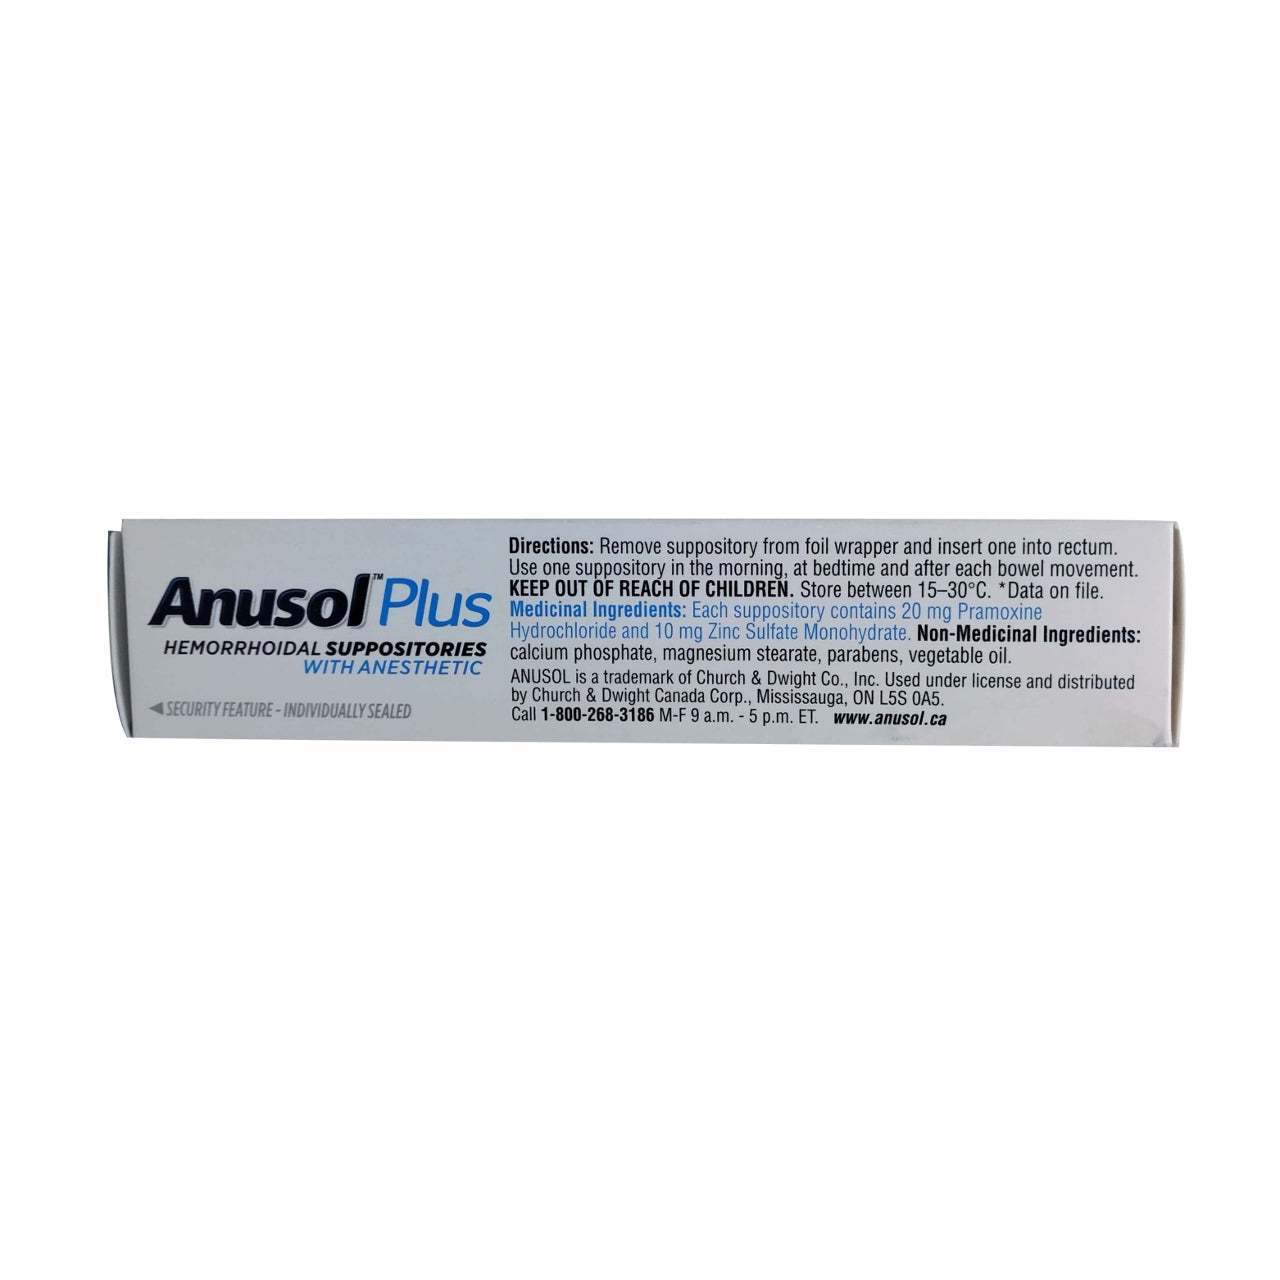 Product details, directions, ingredients, and cautions for Anusol Plus Hemorrhoidal Suppositories with Anesthetic (Suppositories) 24 pack in English